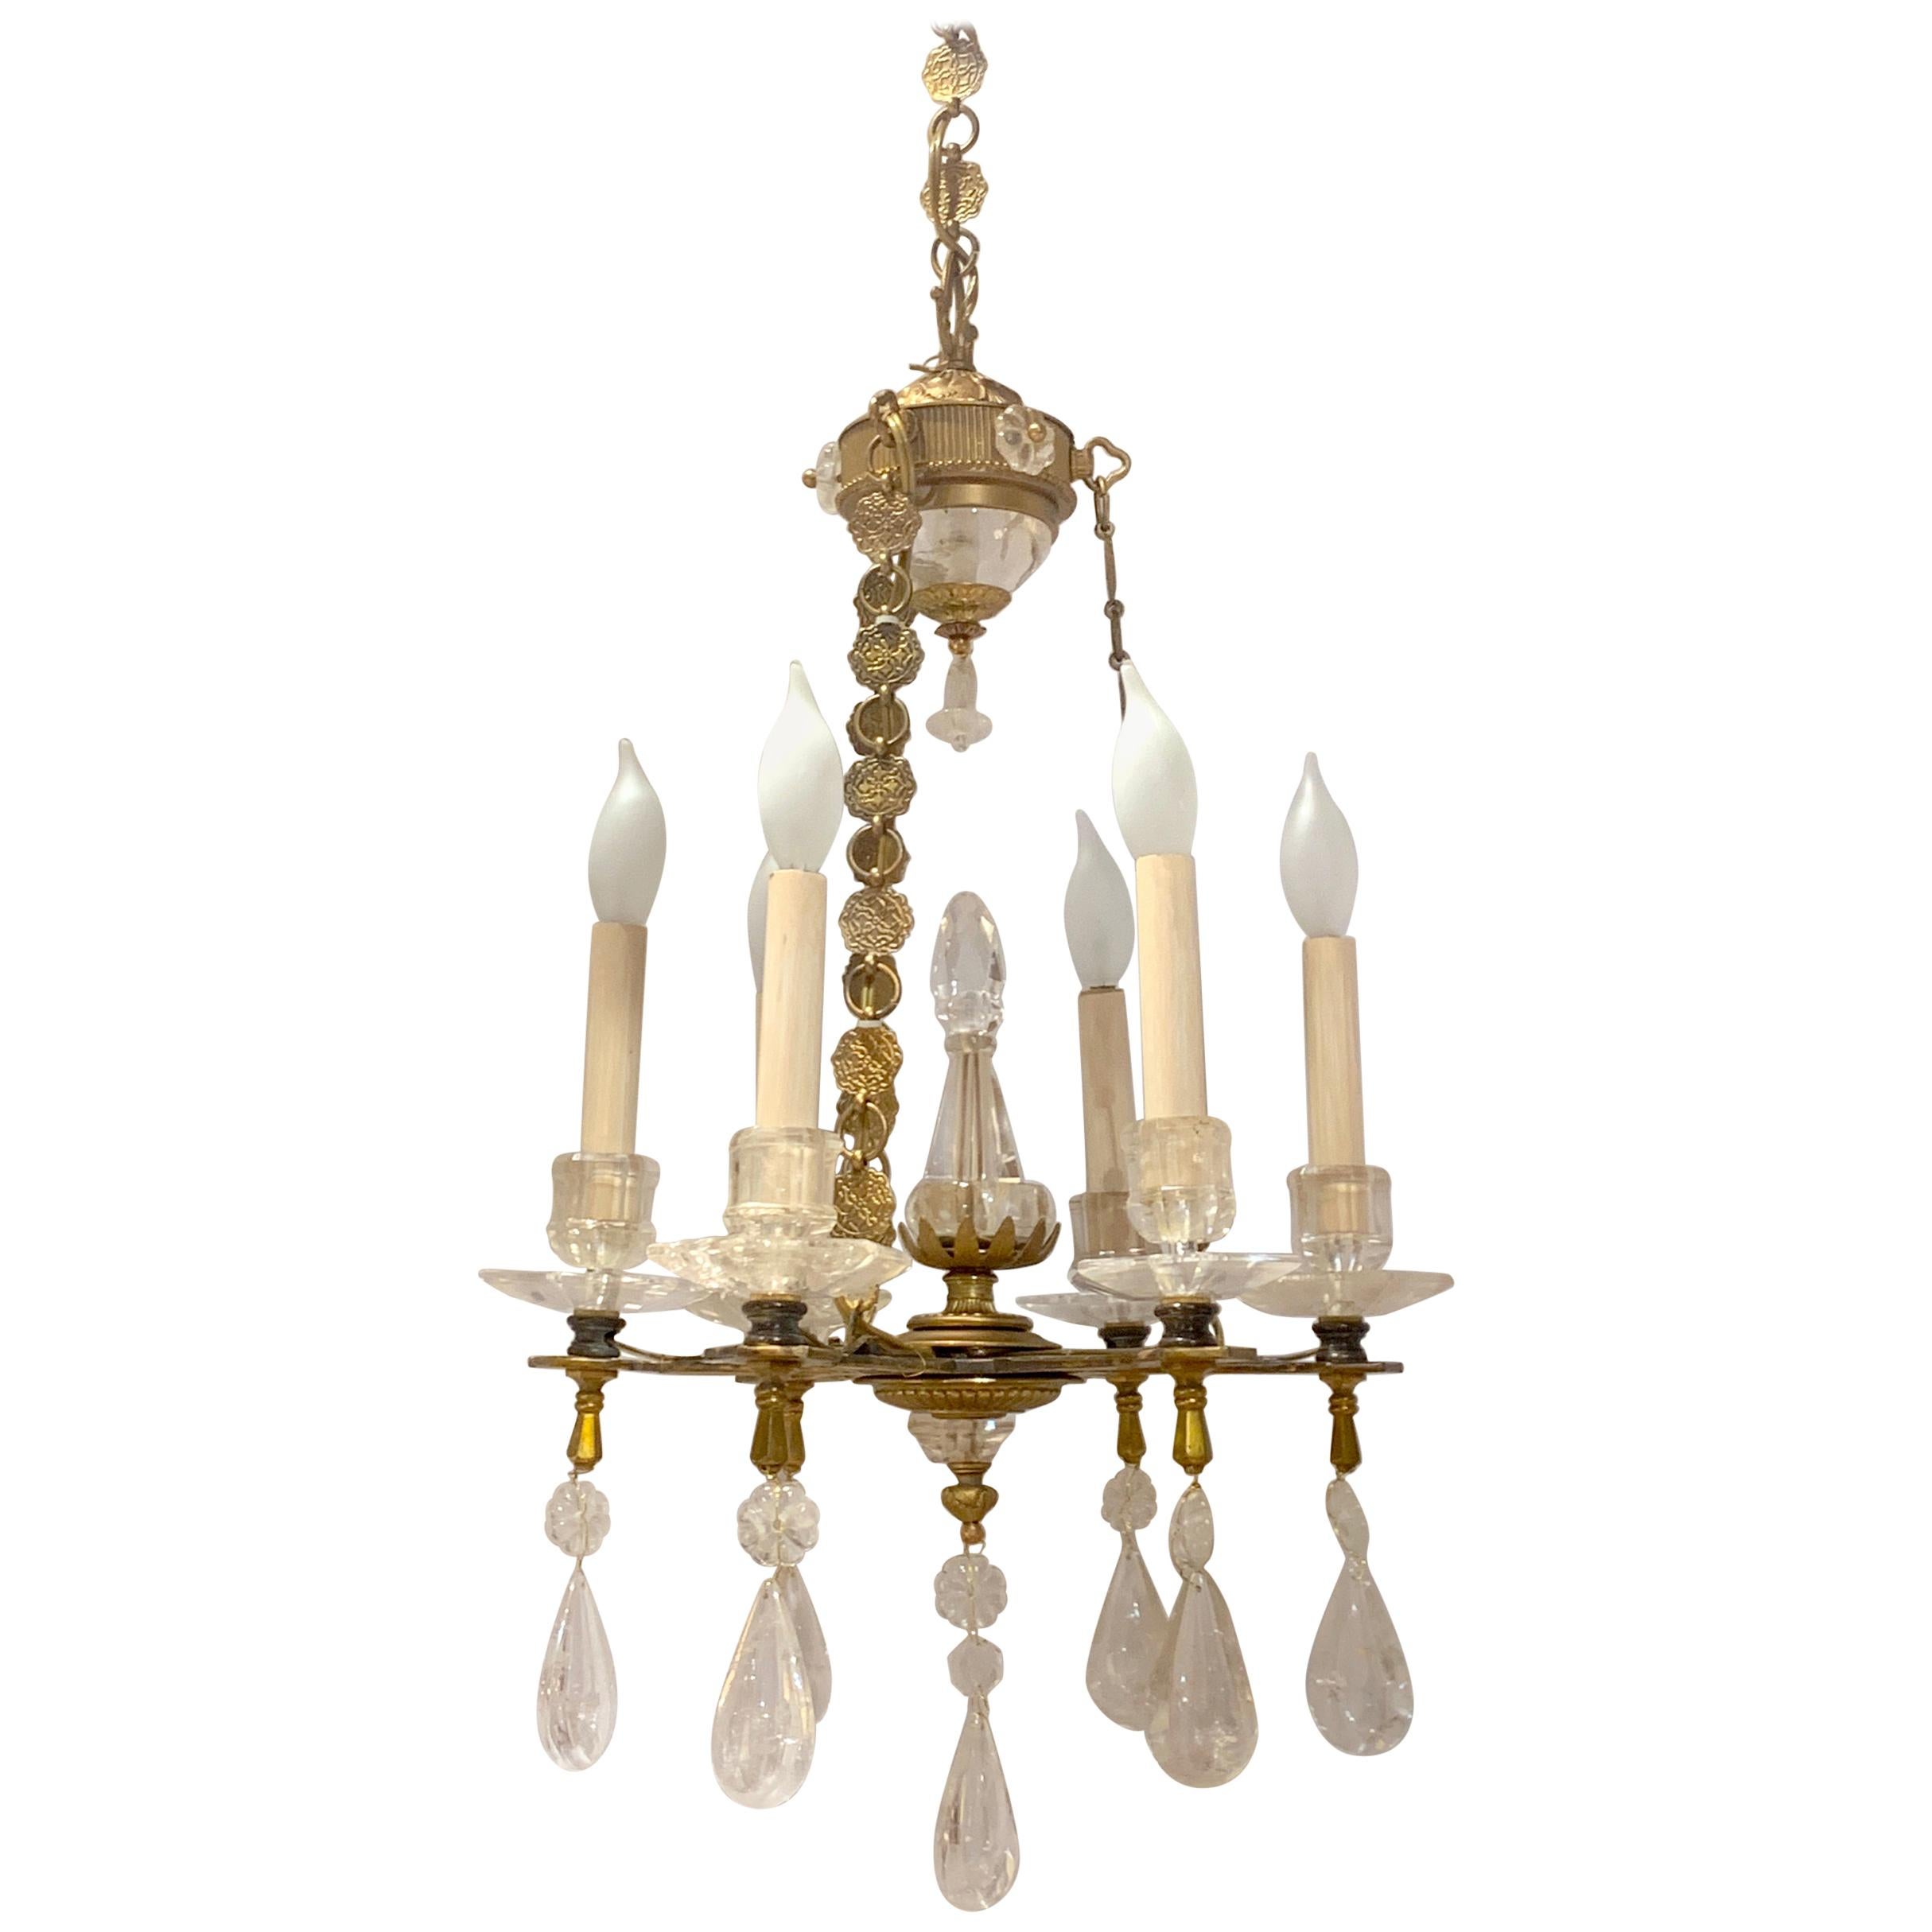 Exquisite All Rock Crystal and Gilt Bronze Six-Light Boudoir Chandelier For Sale